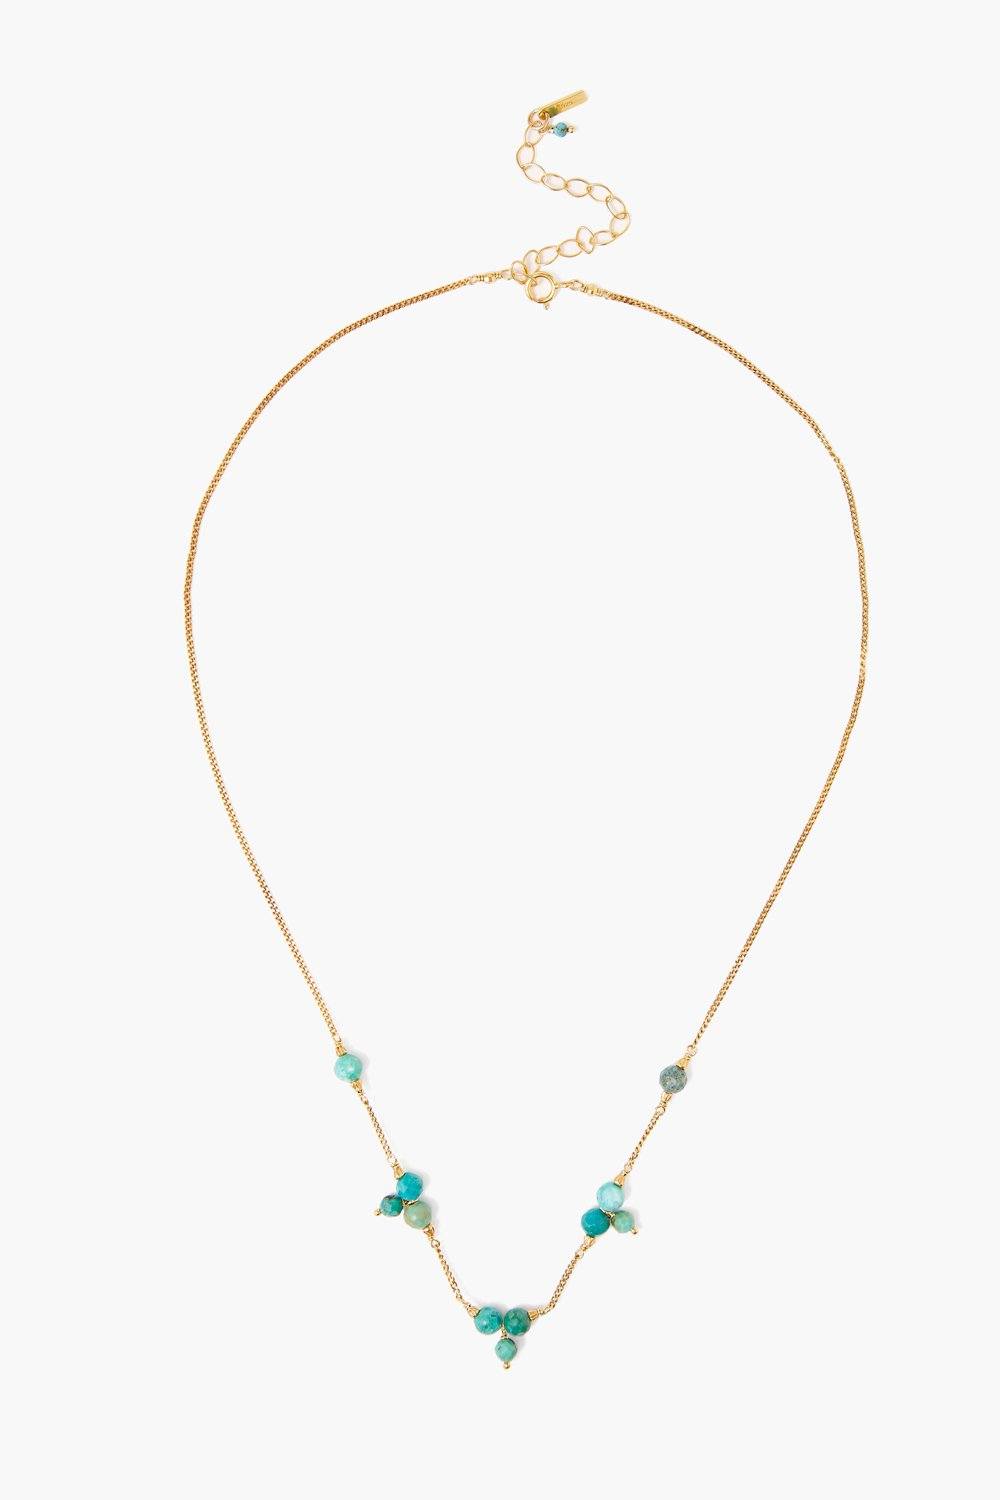 Turquoise and Gold Pyramid Necklace